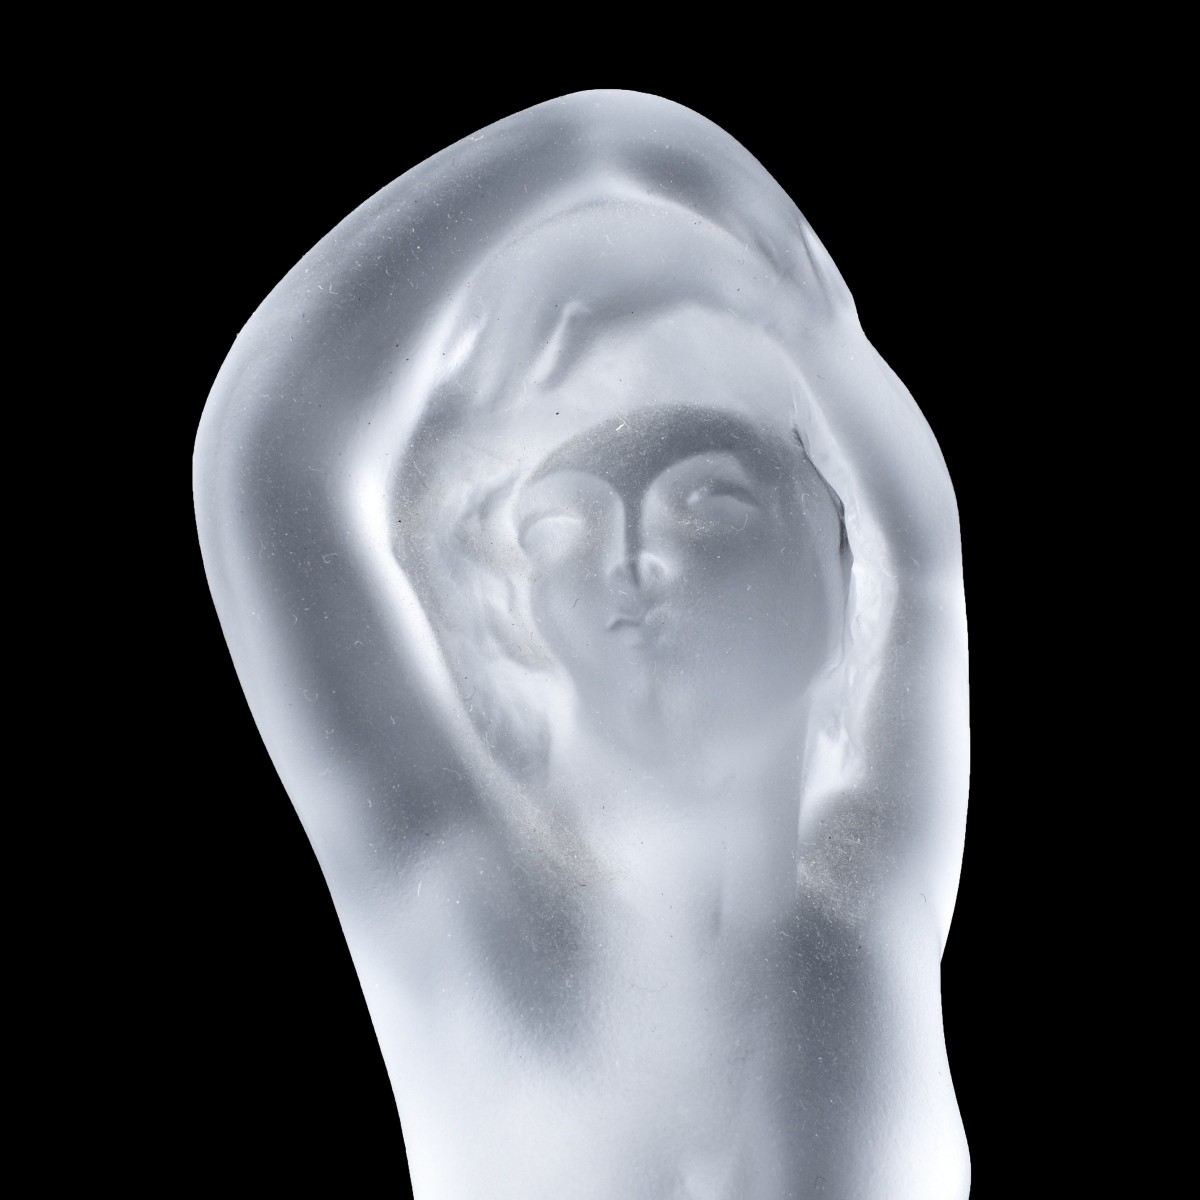 Lalique Frosted Crystal Two Nude Dancers Group